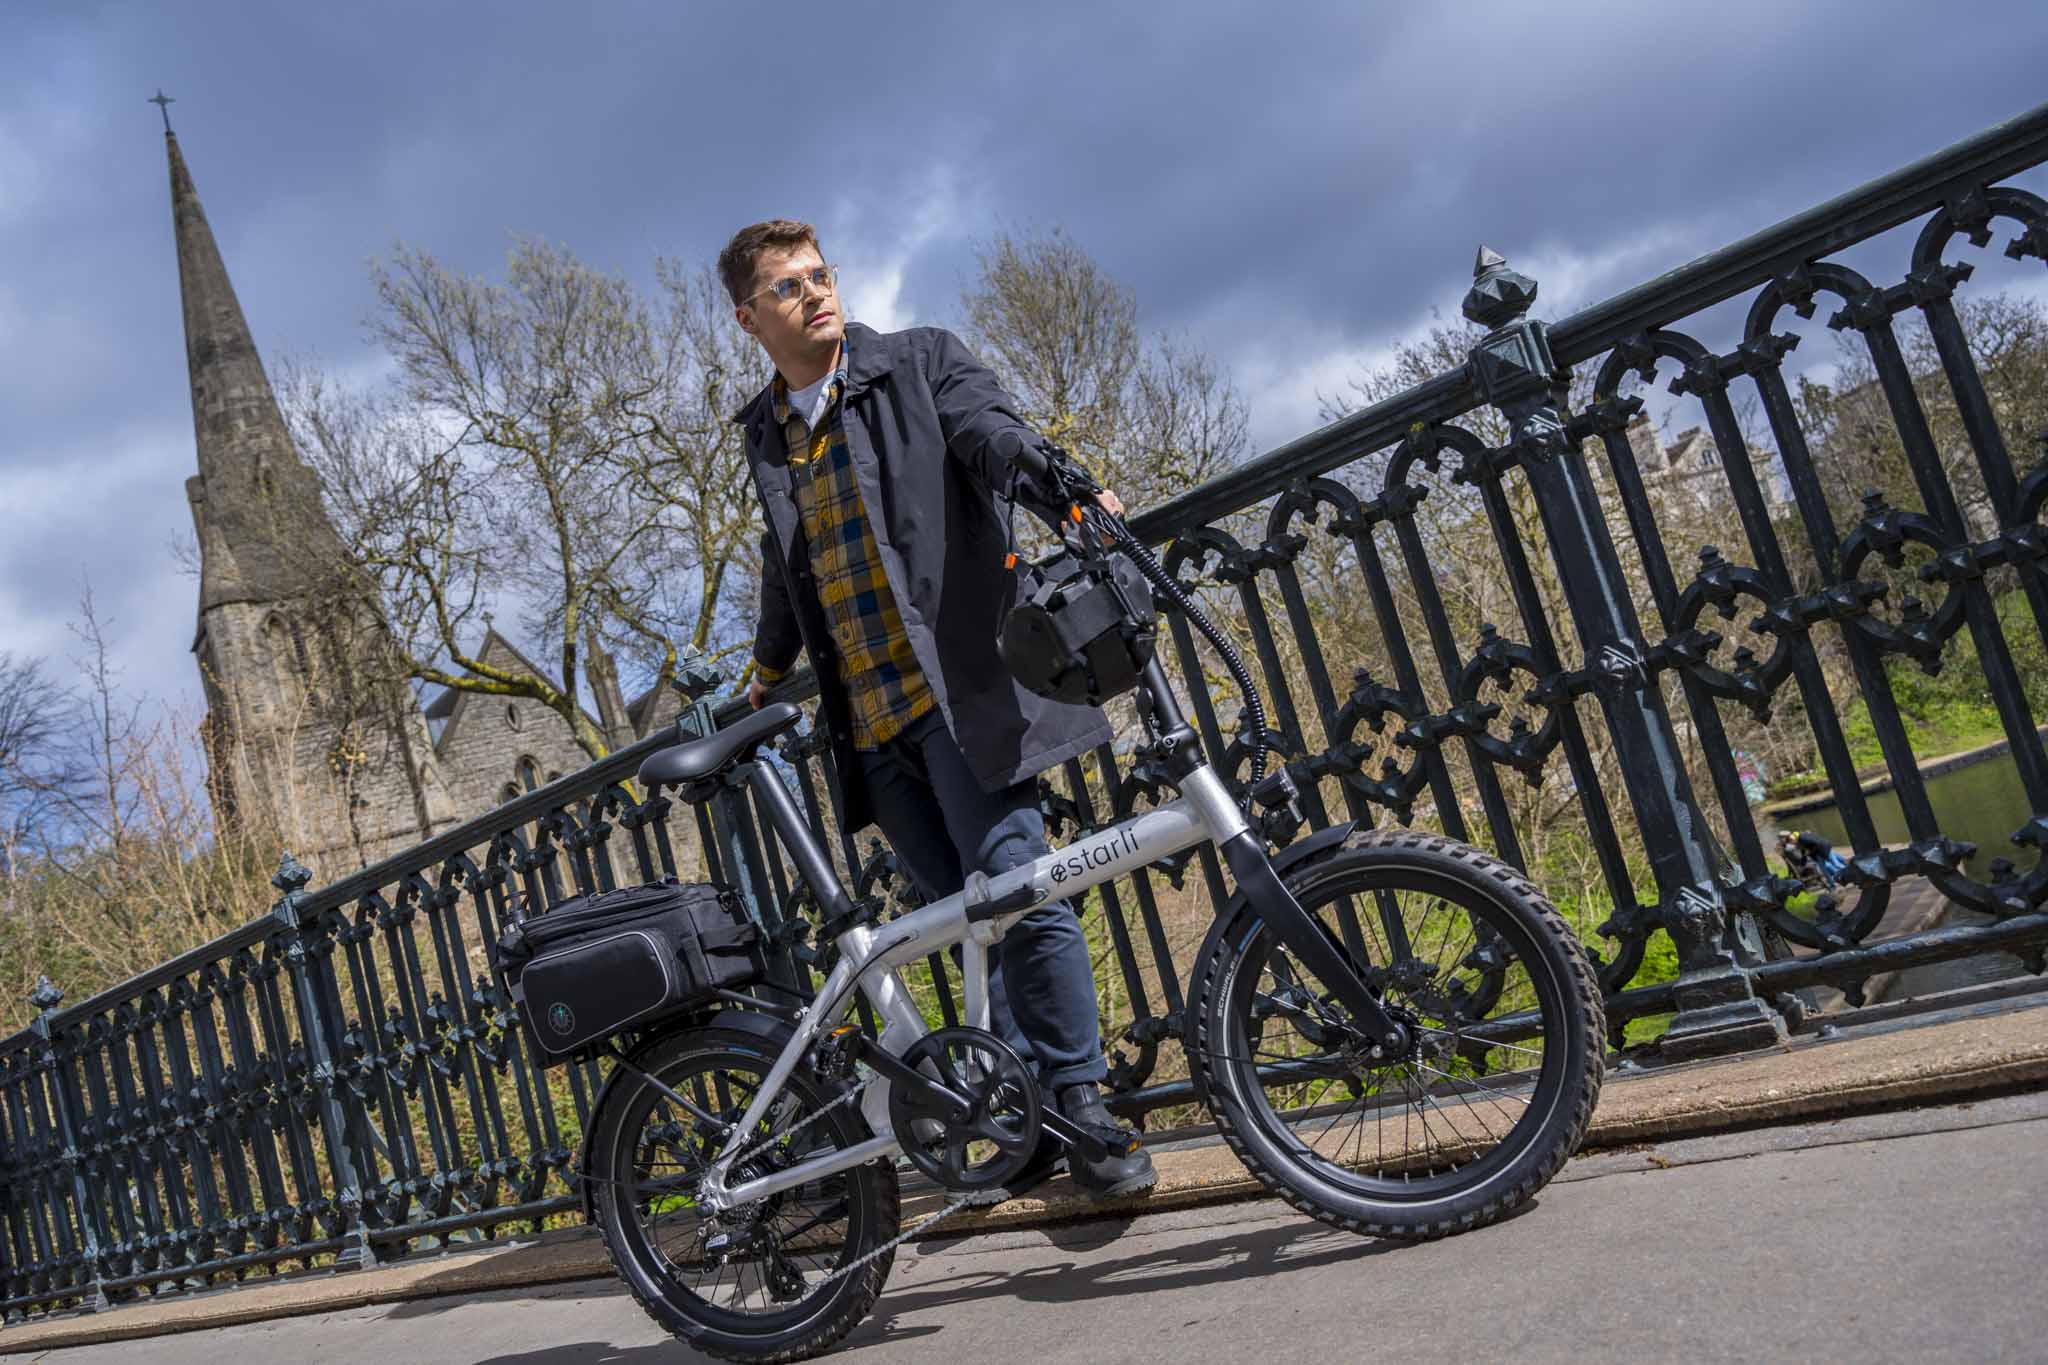 The ultimate off-road folding eBike made in Britain. The estarli e20.8 Play is robust yet lightweight and packs 50Nm torque and balloon tyres for comfort.